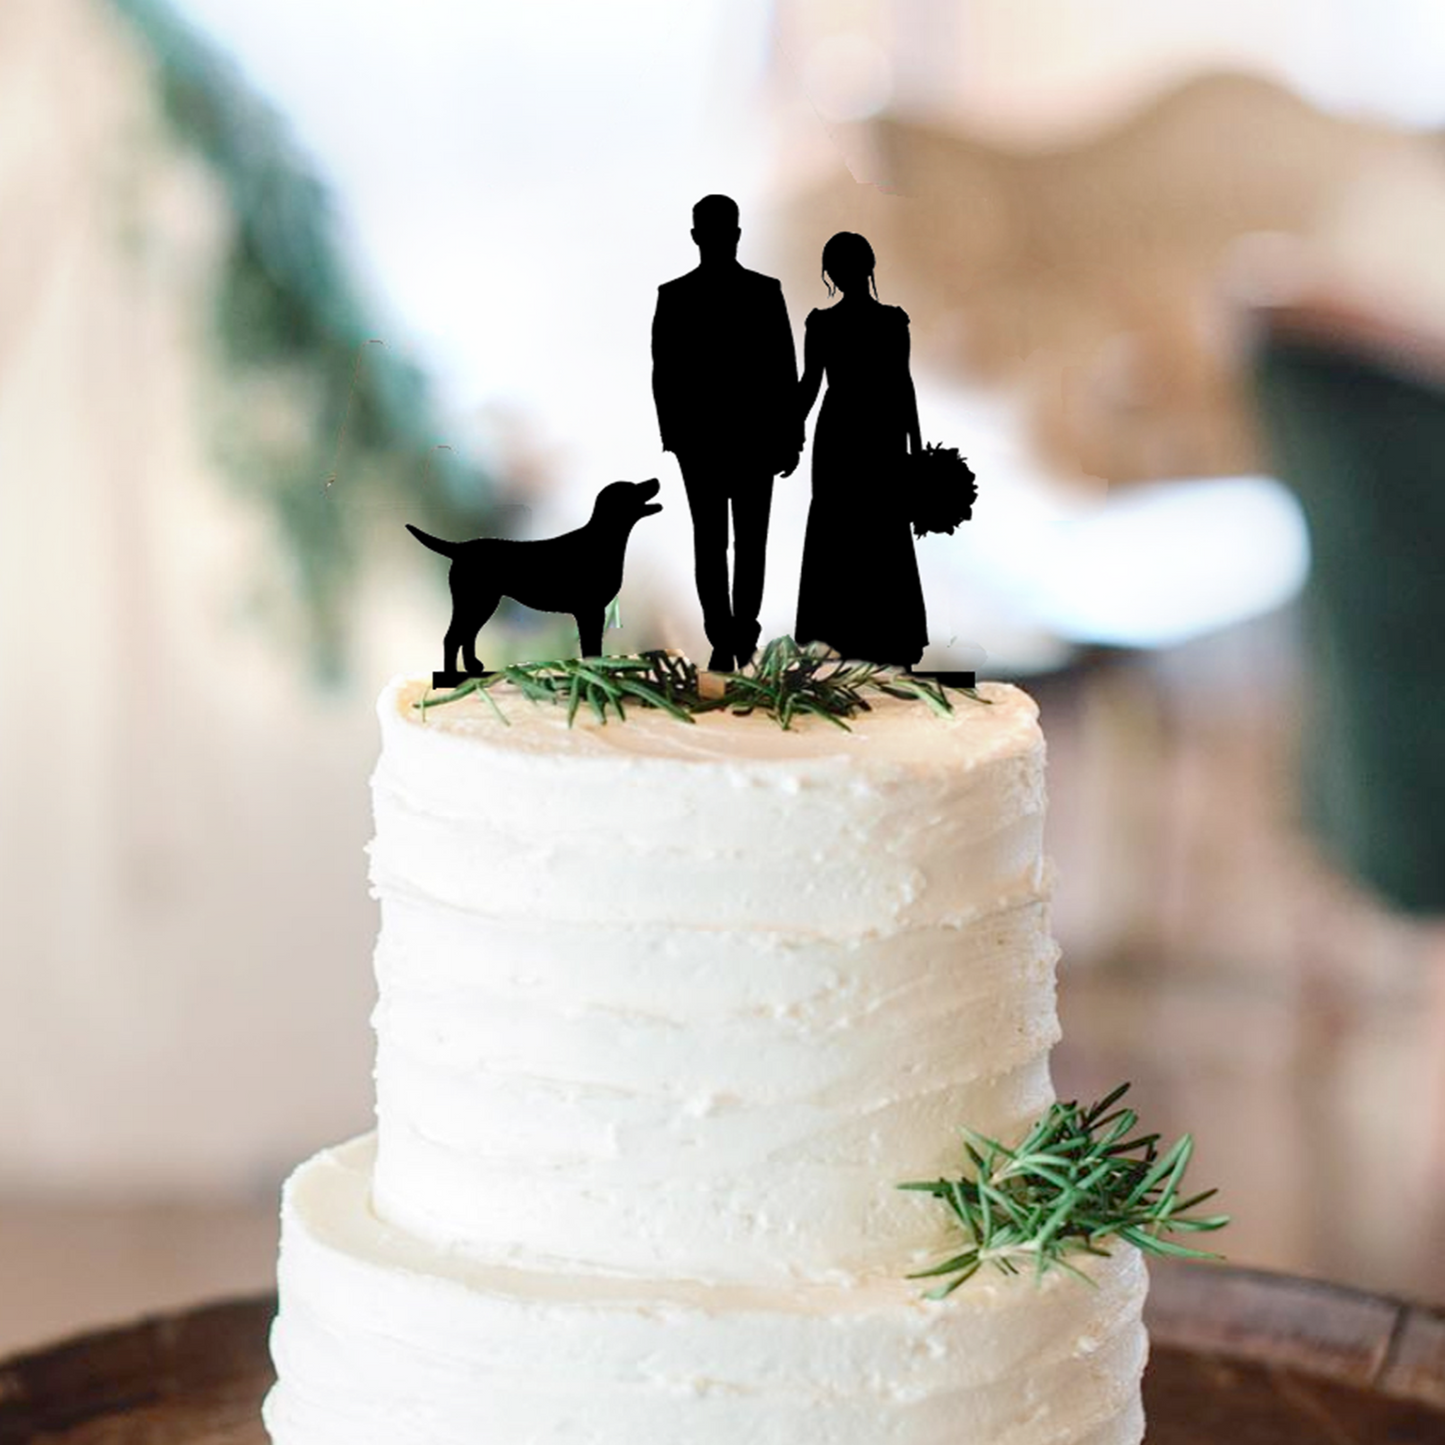 black acrylic cake topper of wedding couple silhouette with dog silhouette